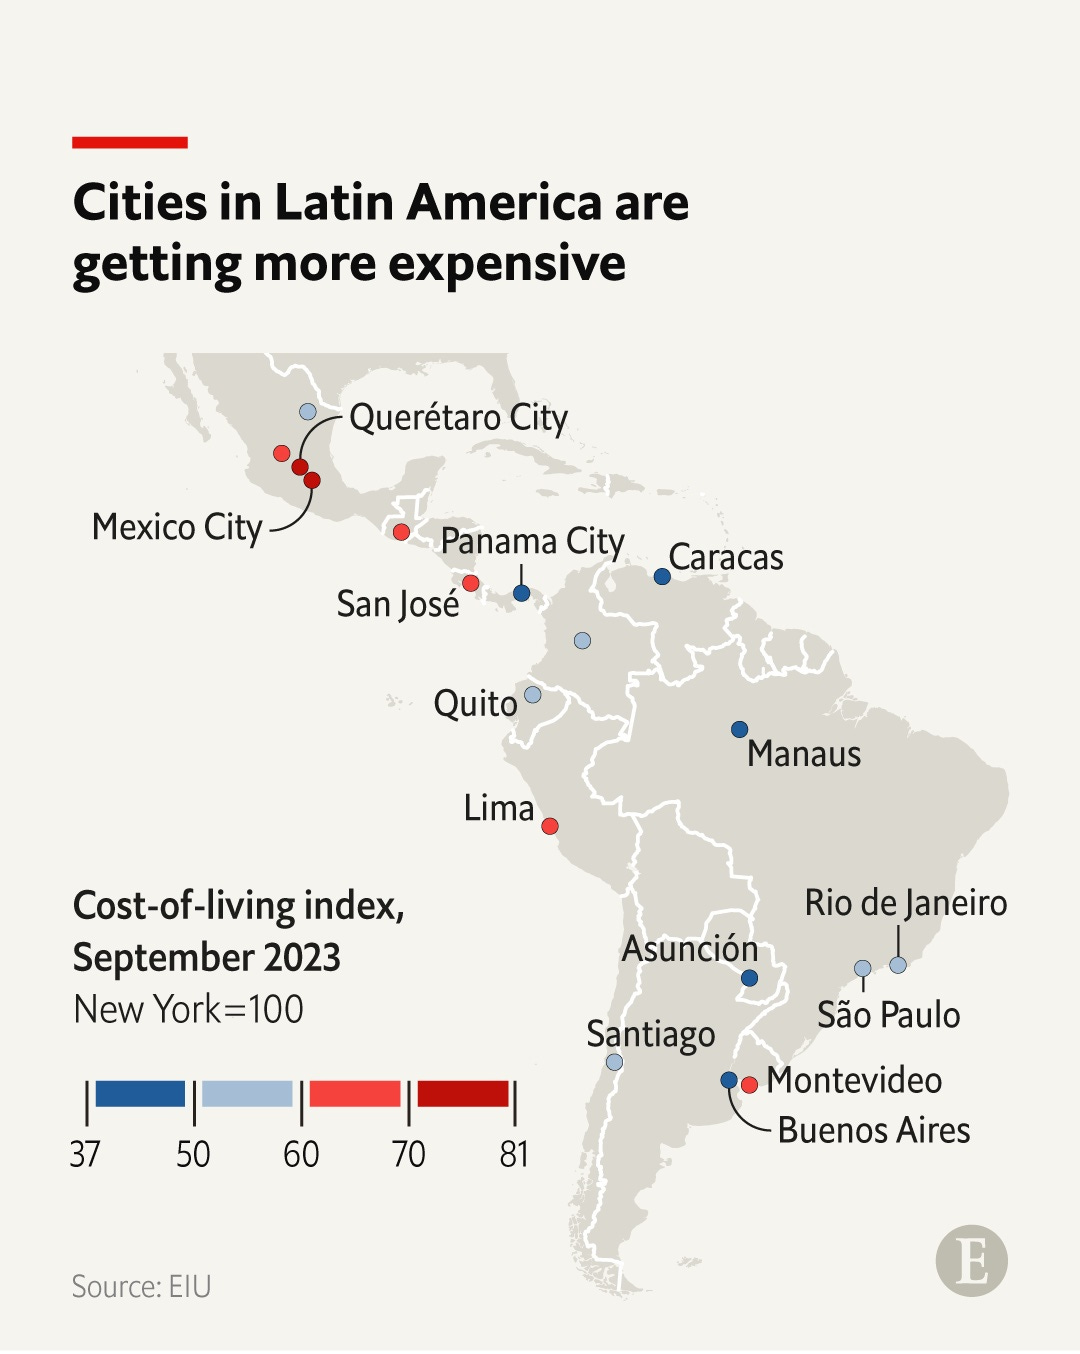 The Economist on X: "Cities in Latin America rose by an average of 13  places in the cost of living index for 2023. What explains the jumps?  https://t.co/OhXyfg05Bn https://t.co/G9iqjBZ0Bn" / X